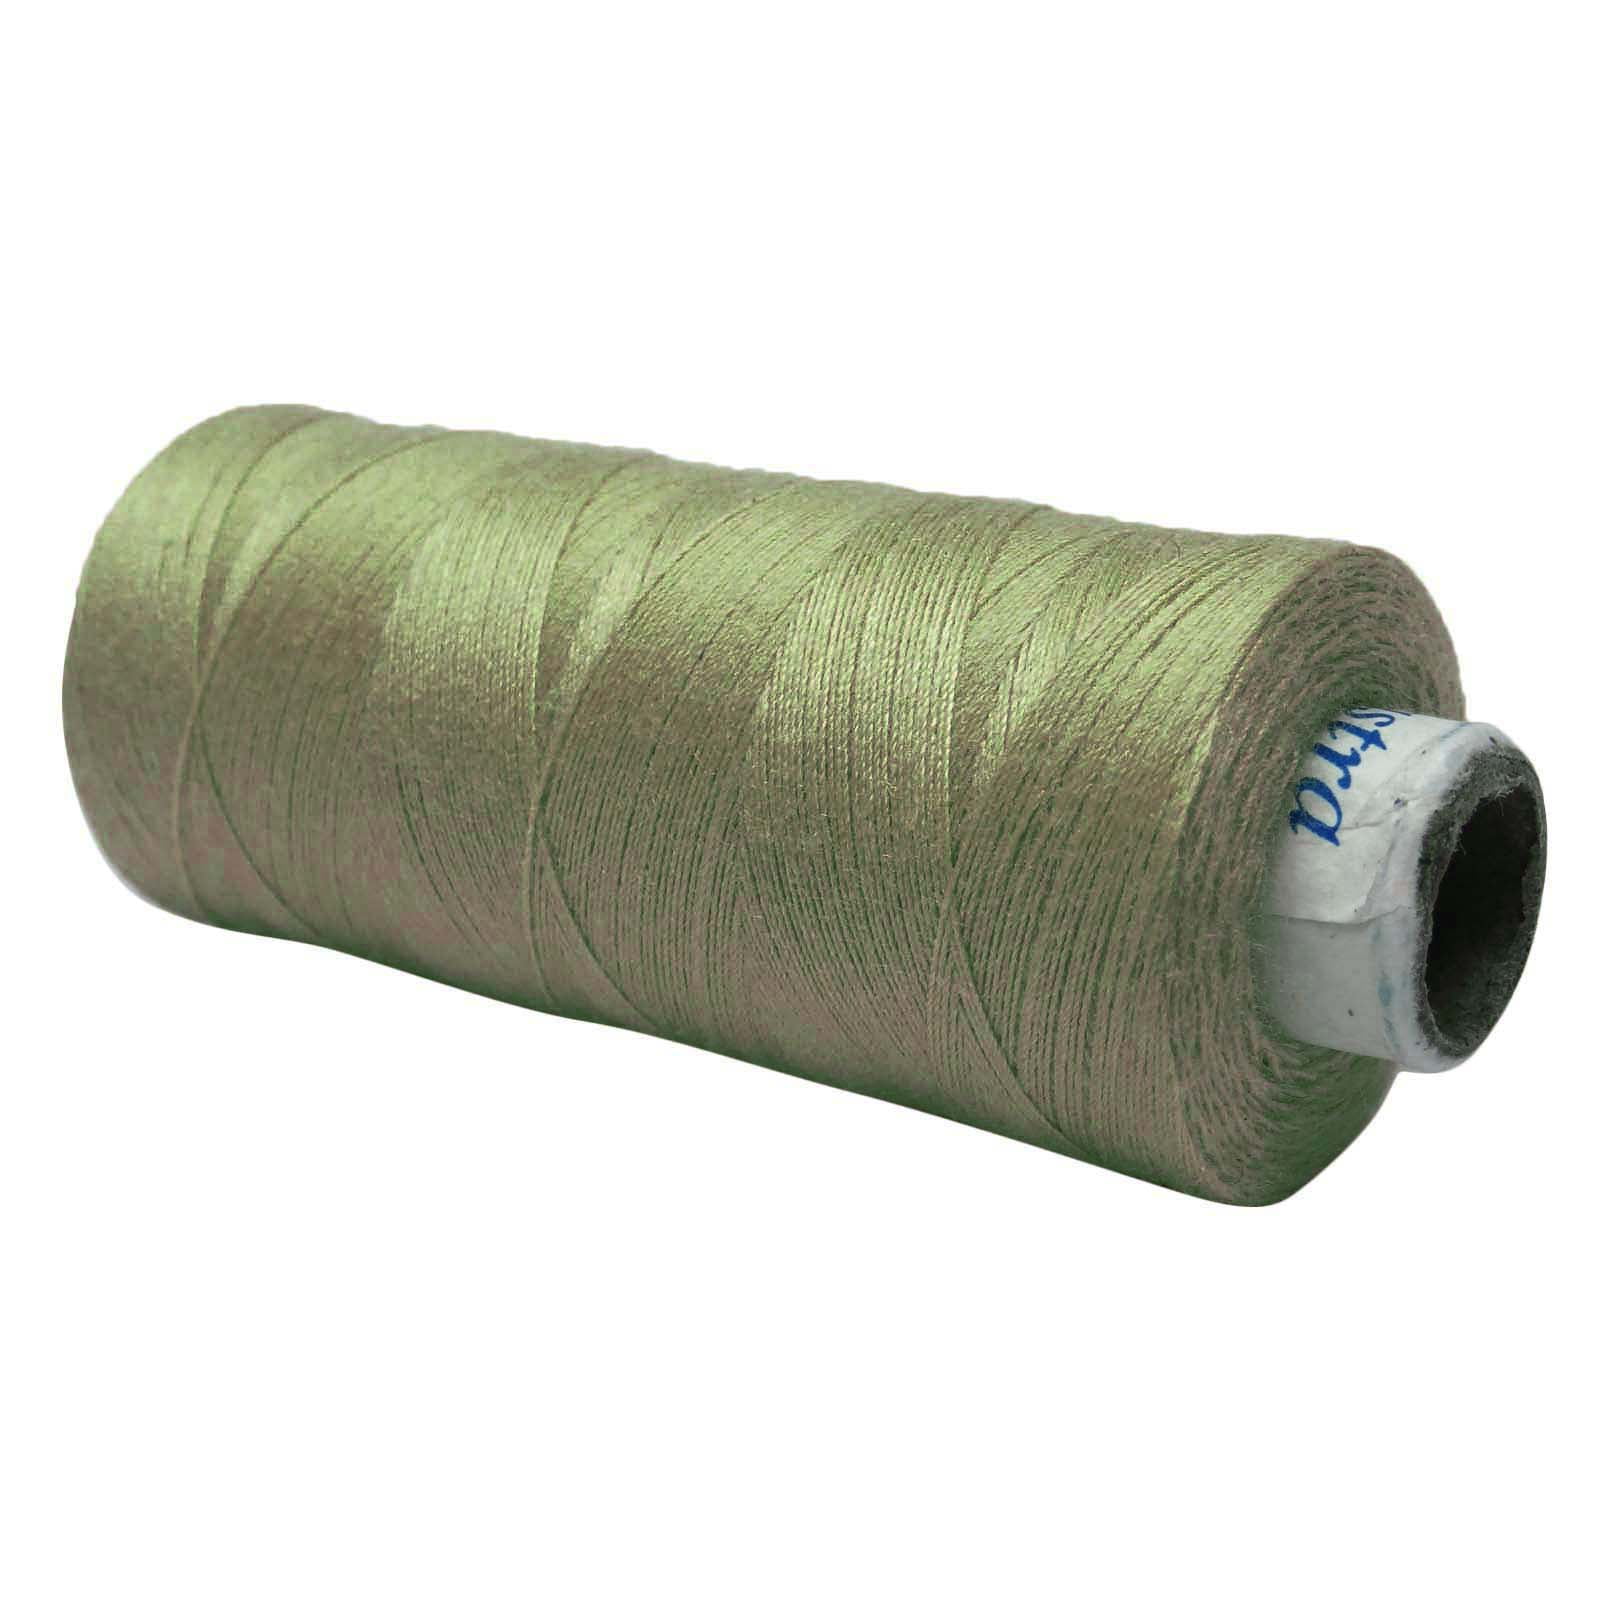 Silver Grey Sewing Thread - All Purpose Polyester Spun Cones Spool —